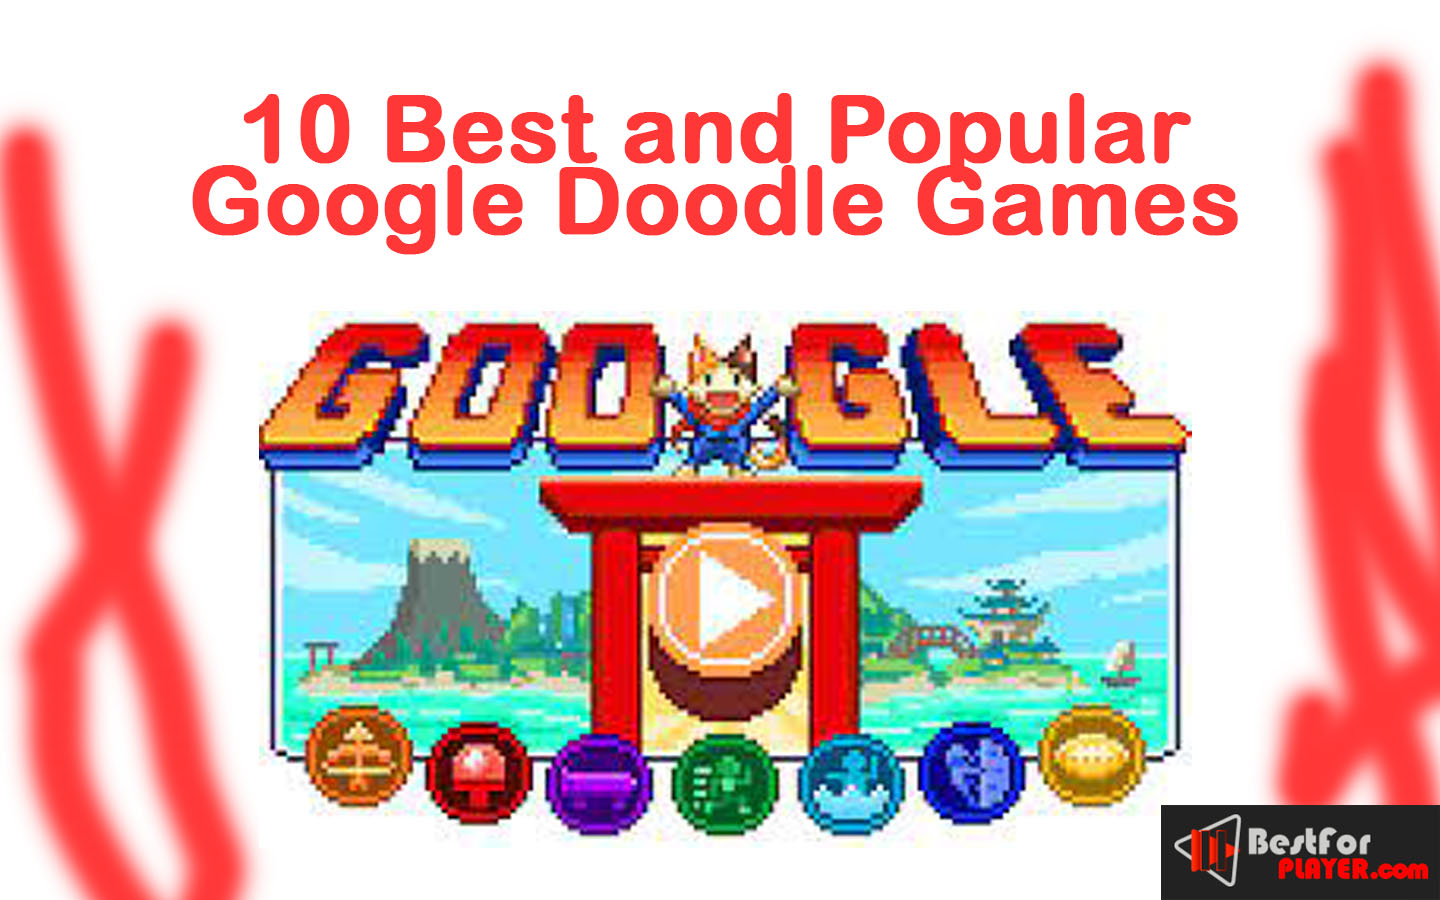 10 Best and Popular Google Doodle Games - Best For Player